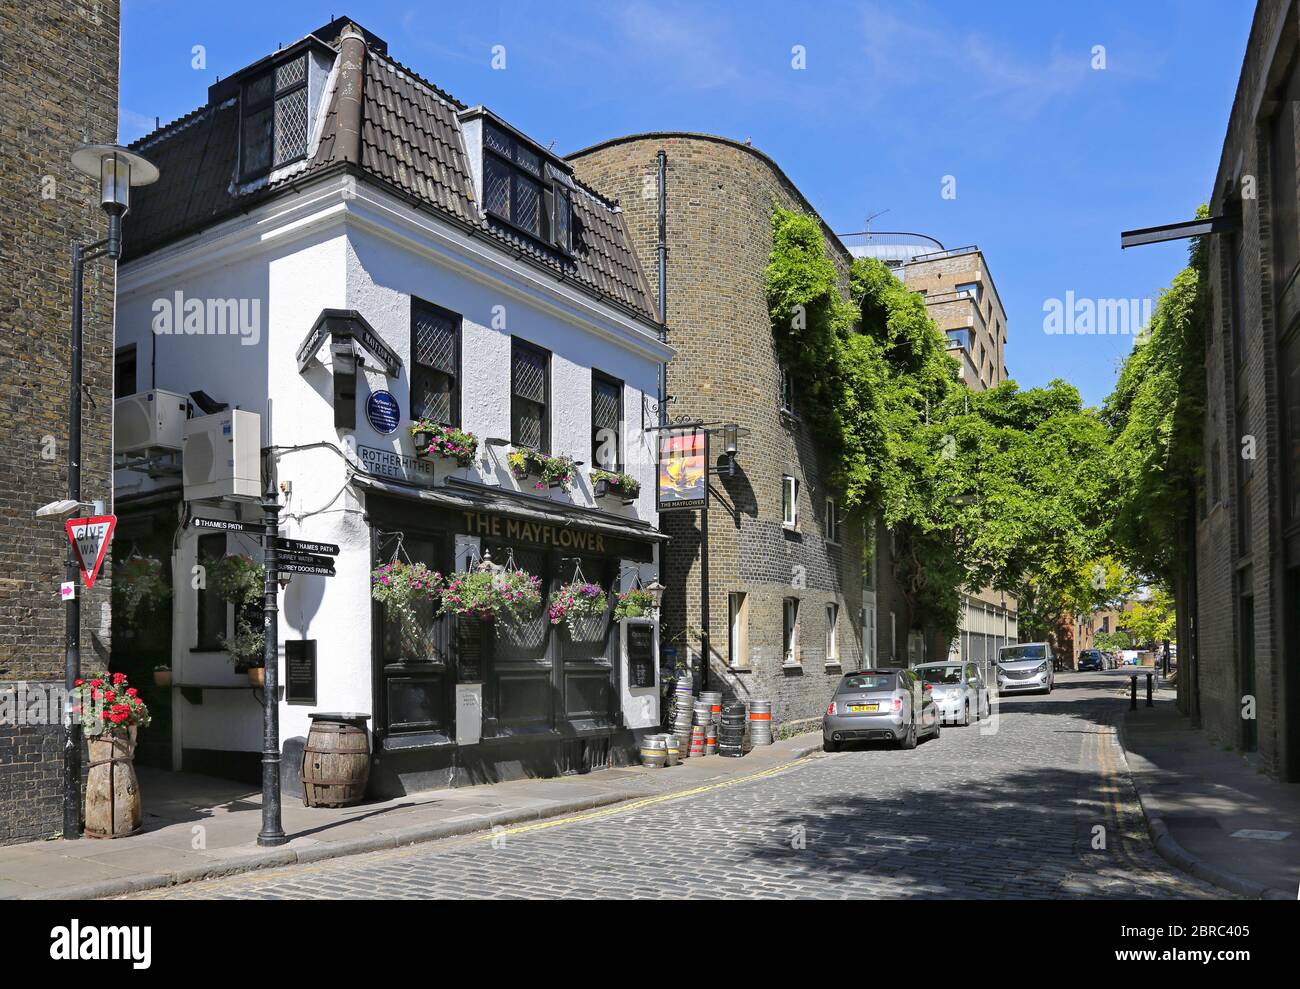 The Mayflower pub on Rotherhithe Street in south east London, UK. A traditional Public House on the River Thames - closed due to Covid Lockdown. Stock Photo